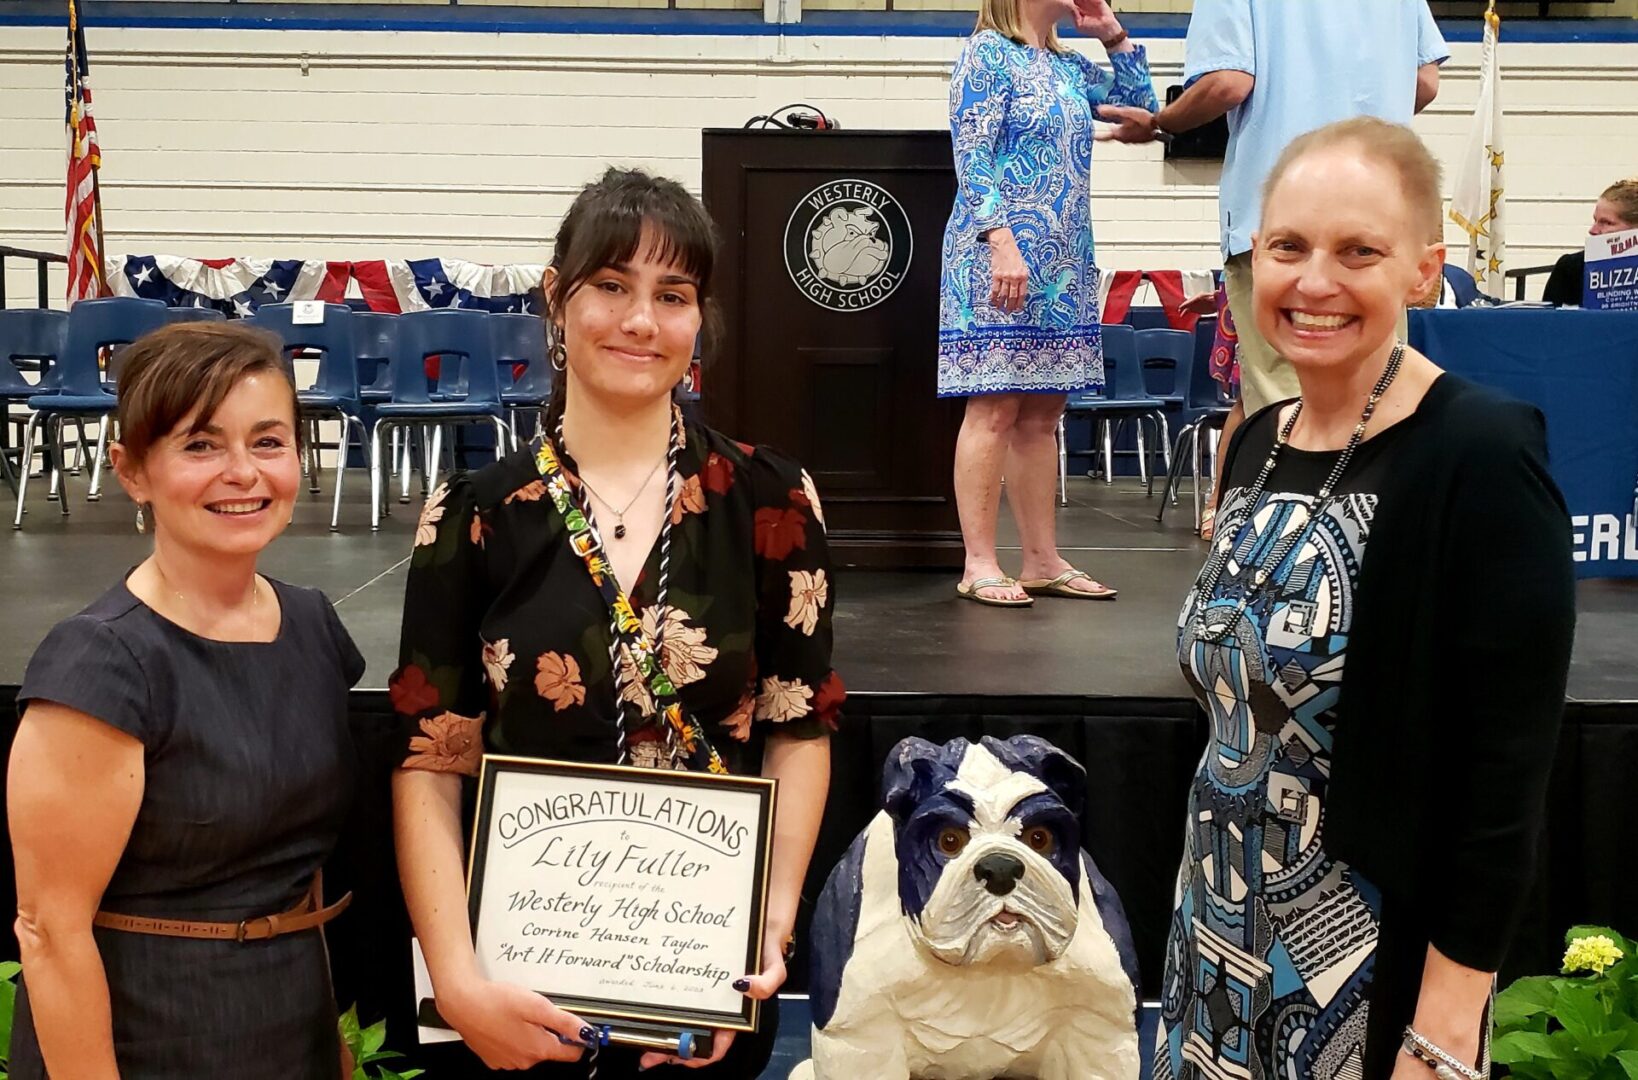 Lily Fuller, Westerly H.S. Award Winner, with Serena Bates and Corring Hansen Taylor, 2023